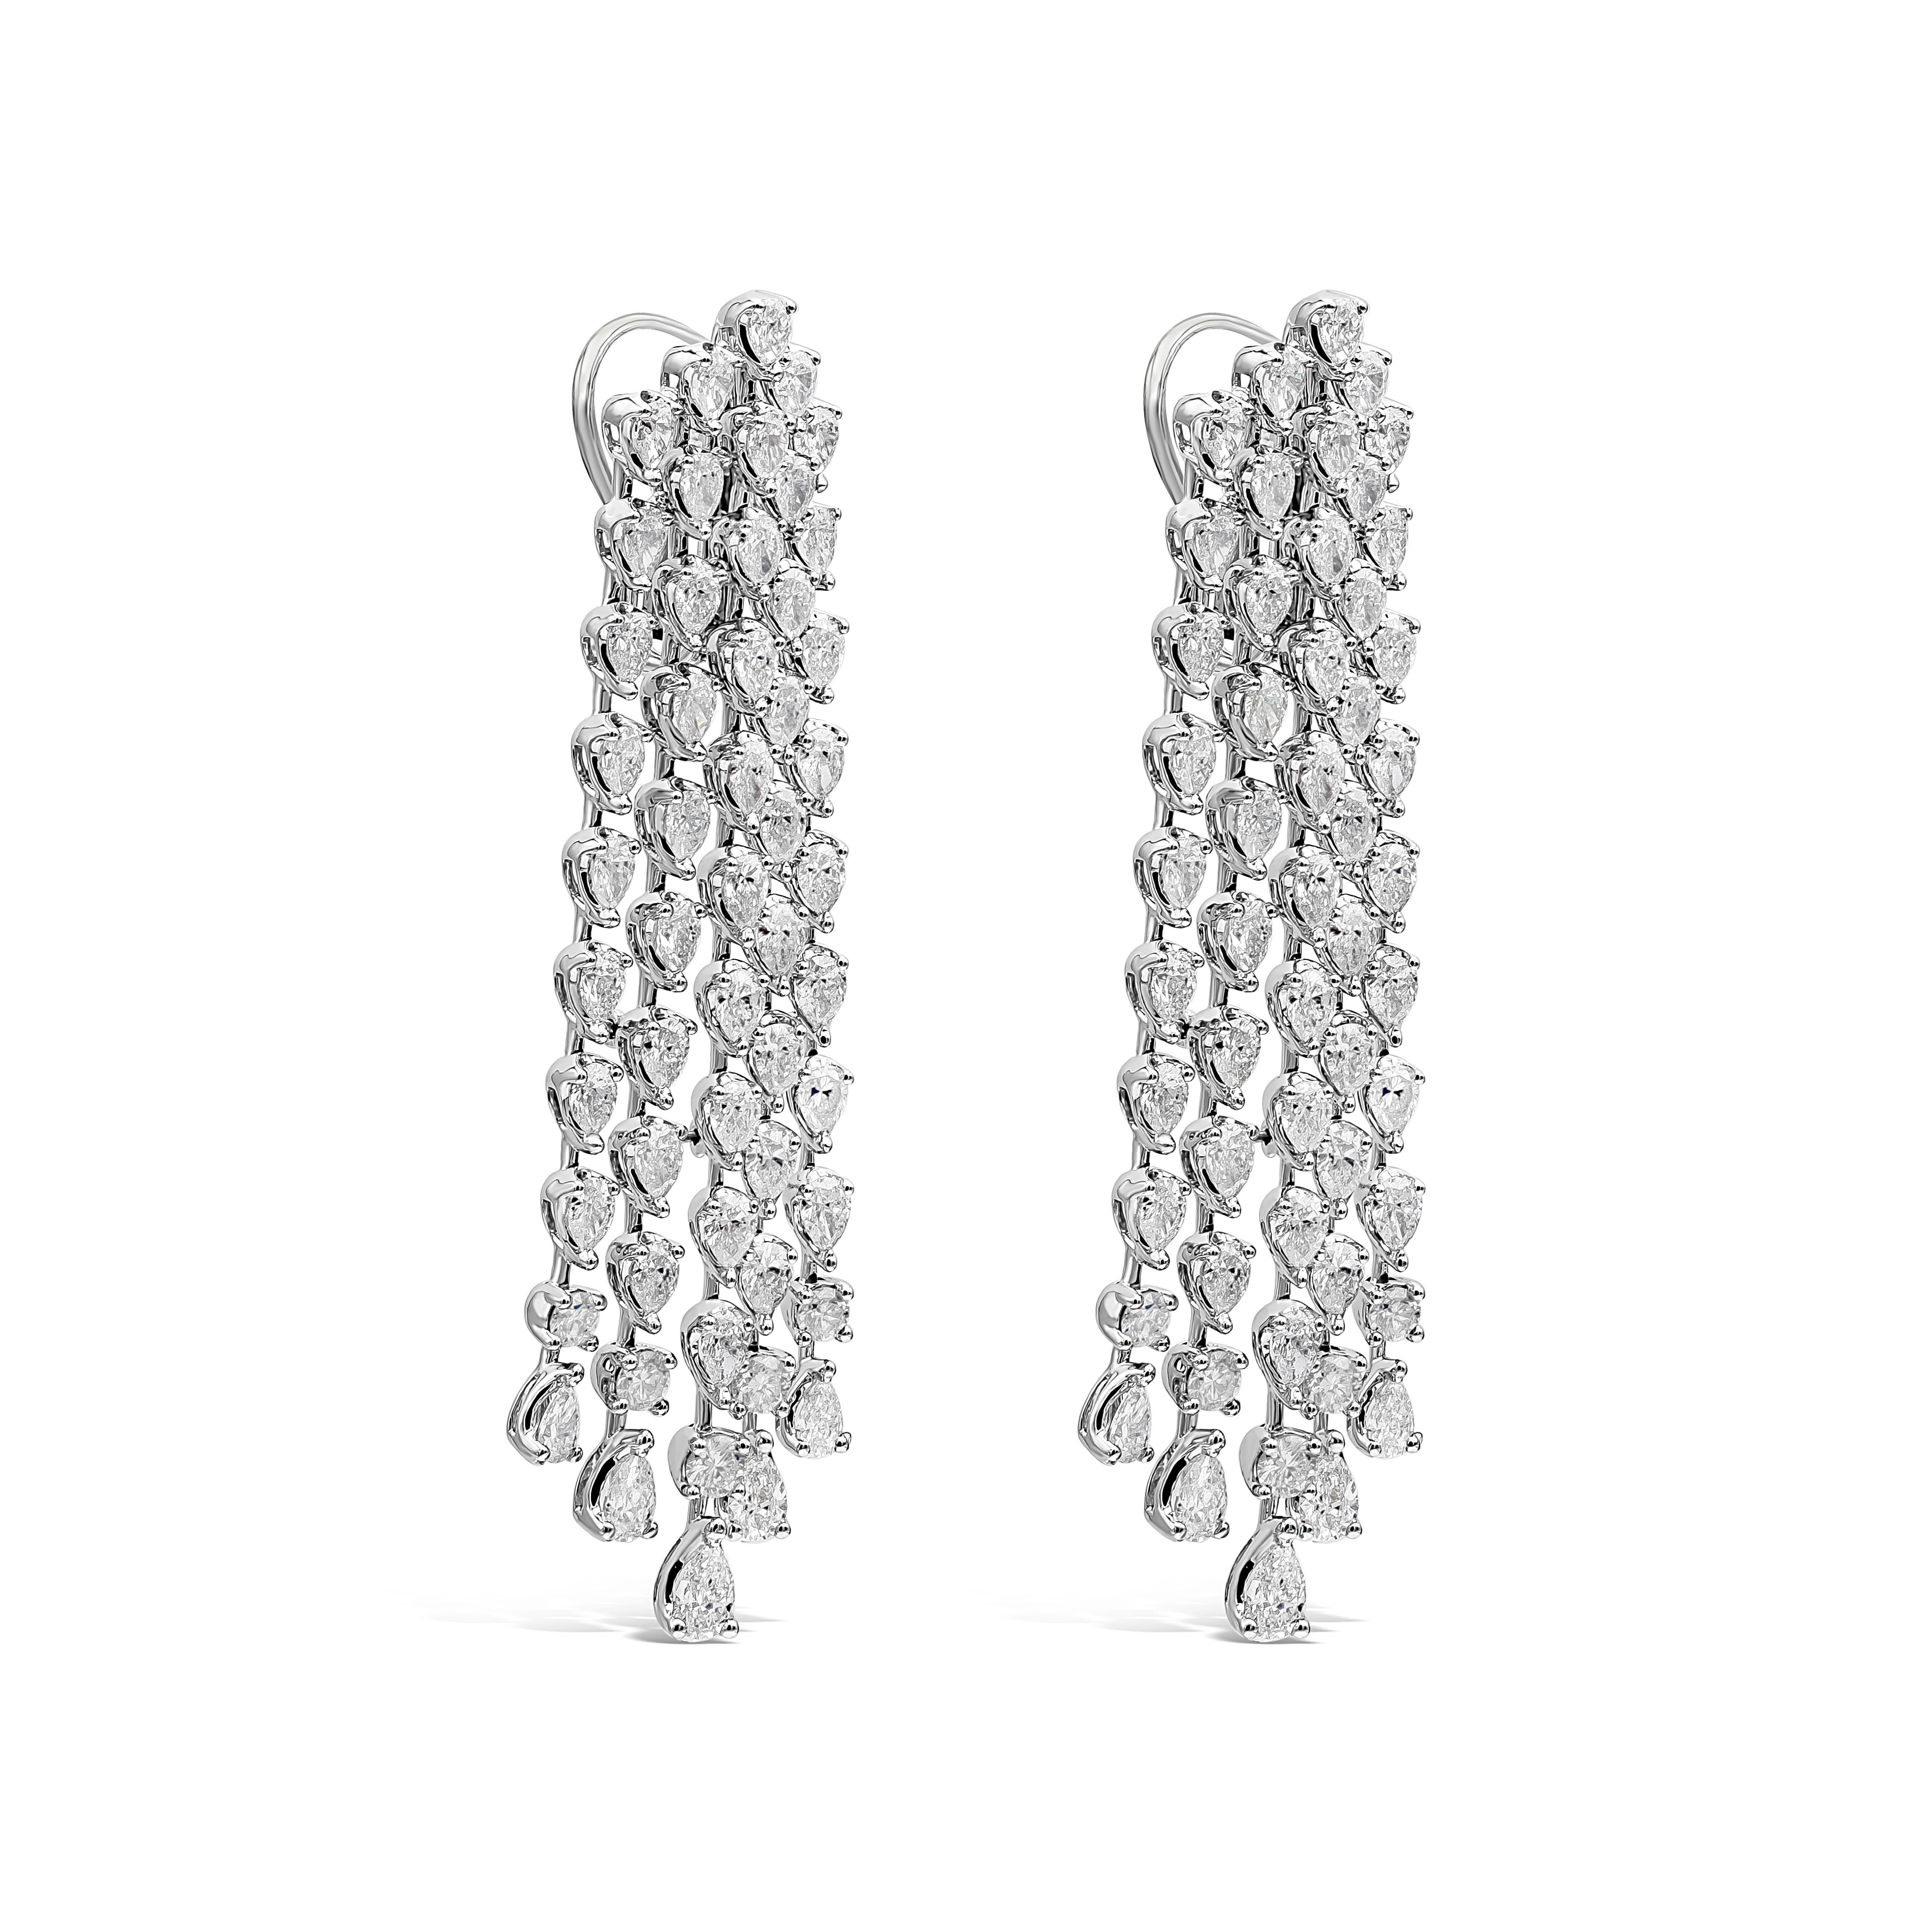 A sophisticated piece of jewelry showcasing five-rows of pear shape diamonds set in an elegant chandelier waterfall design. Total carat weight of the diamonds is 8.10 carats. The piece is 60mm in length, 16mm in width and weighs 20.50 grams.  Made